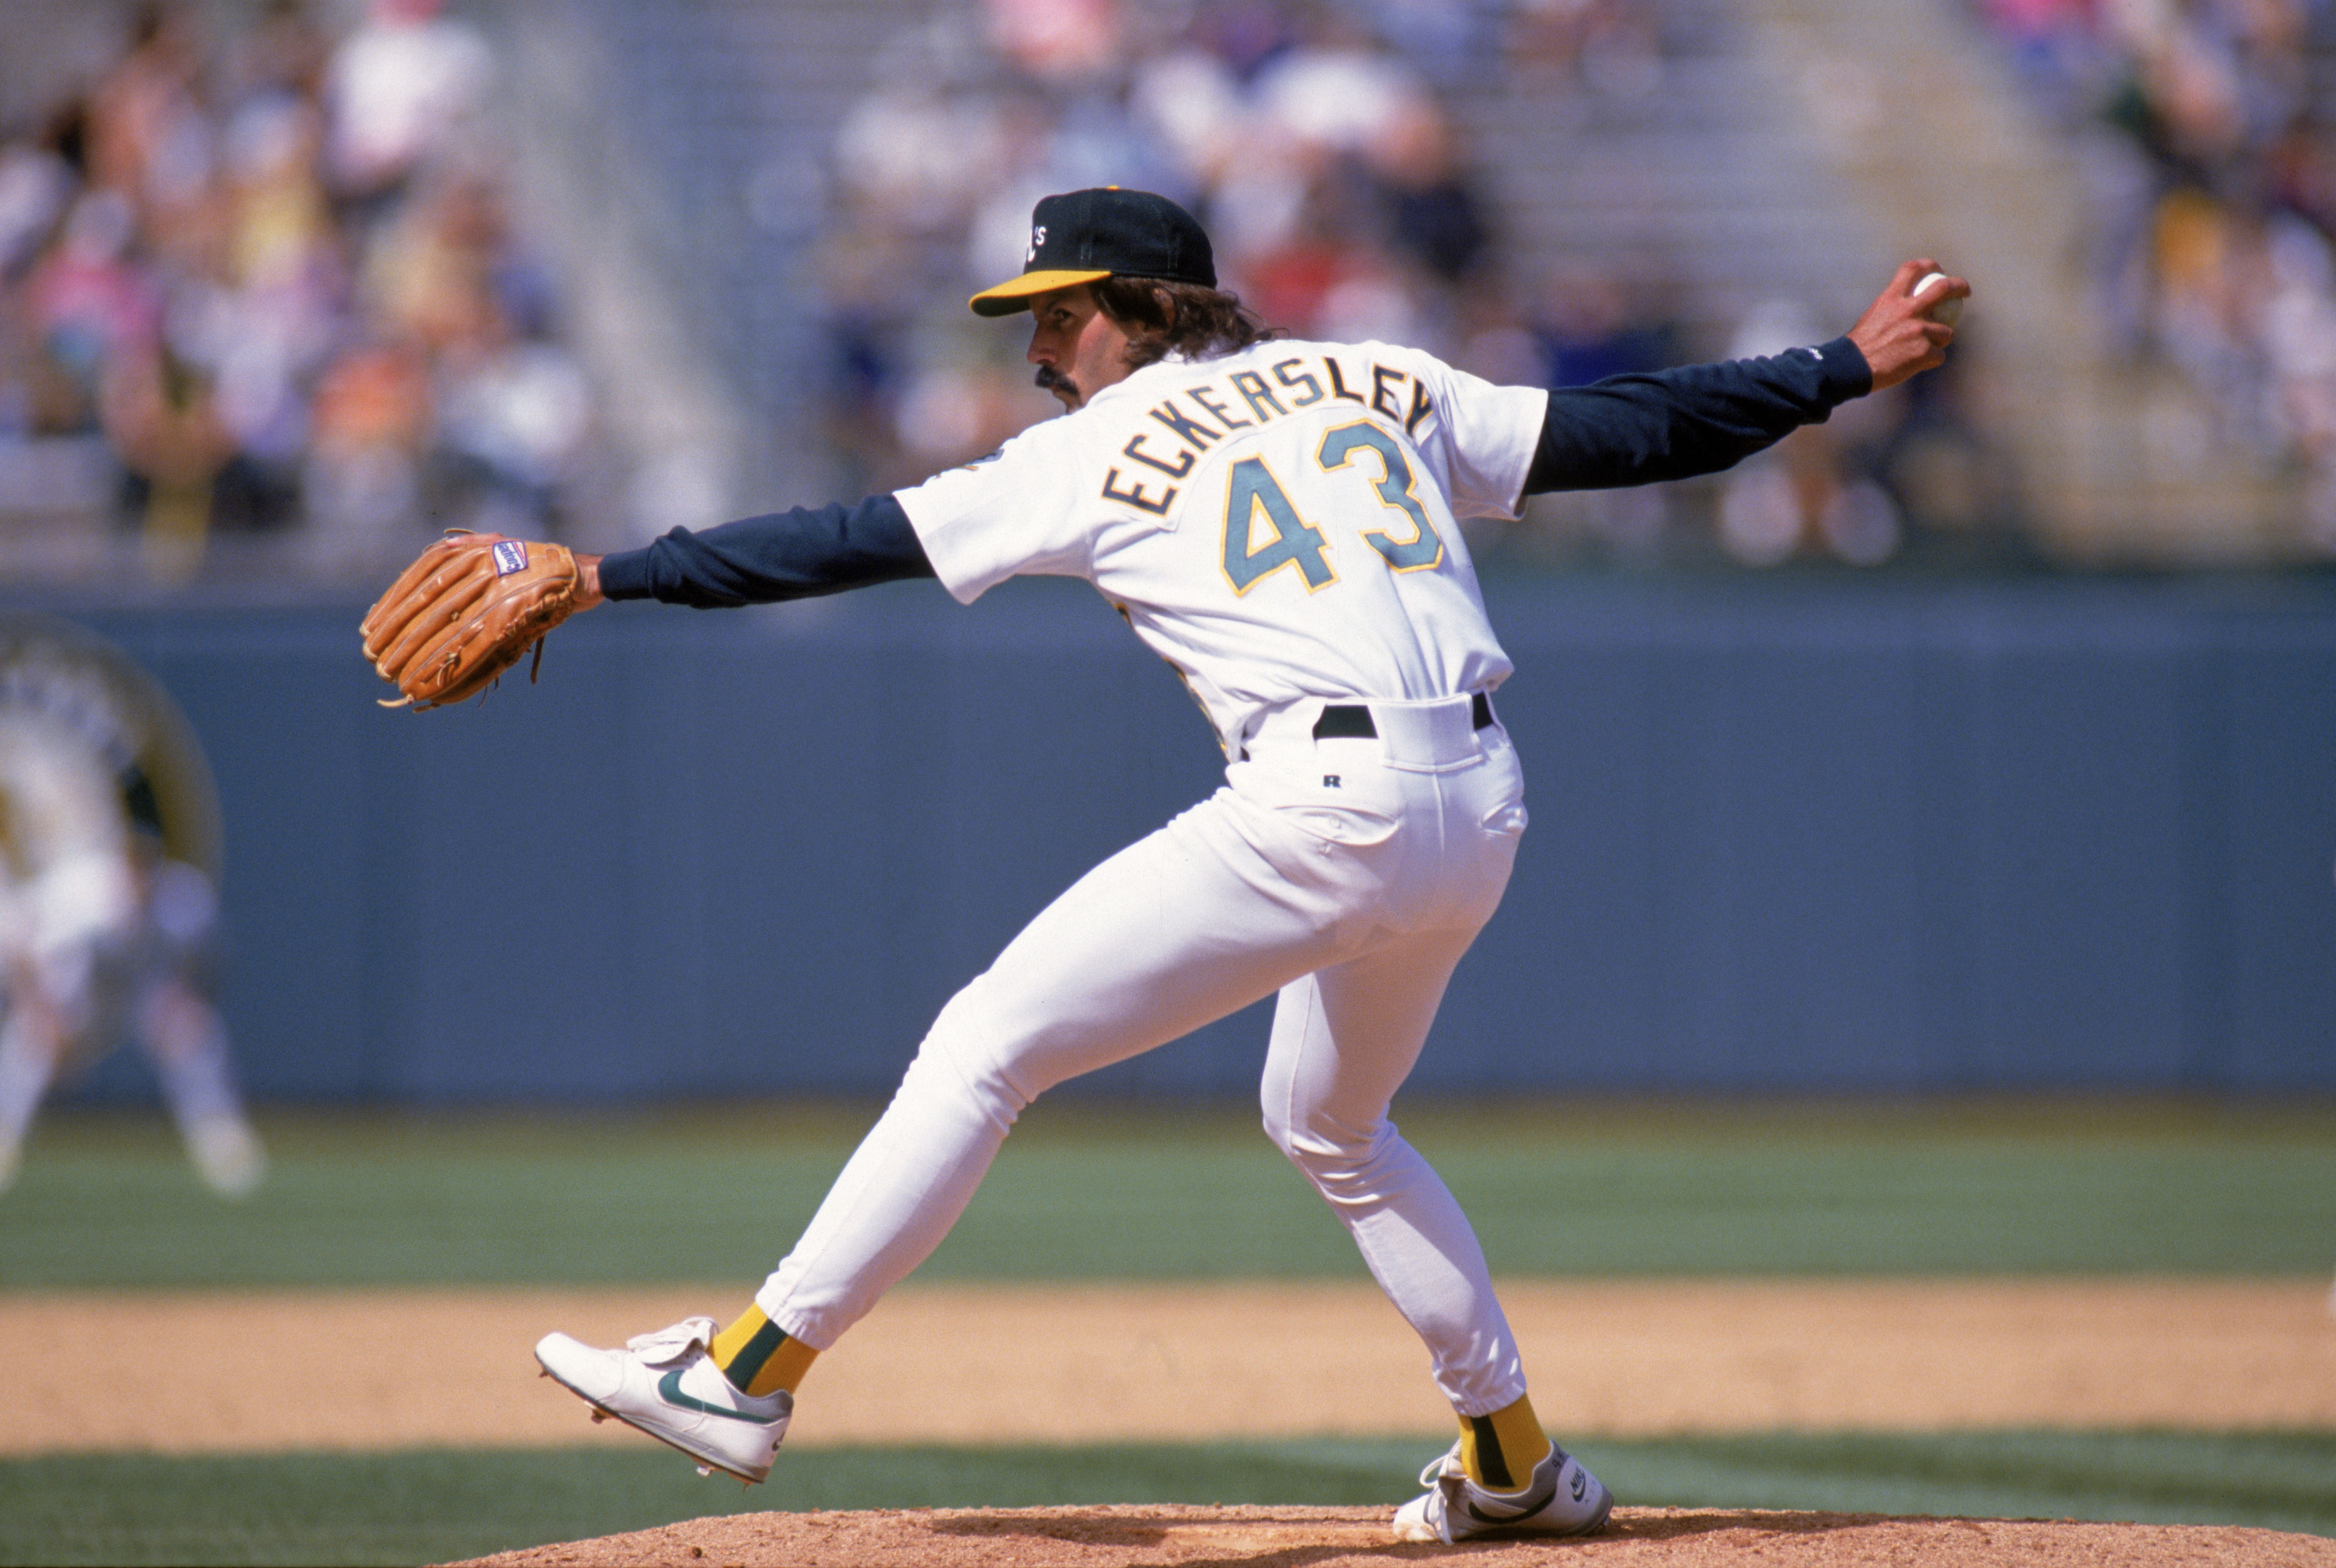 OAKLAND, CA - APRIL 25:  Pitcher Dennis Eckersley #43 of the Oakland Athletics delivers against the Cleveland Indians during the game at the Oakland-Alameda County Coliseum on April 25, 1993 in Oakland, California.  (Photo by Otto Greule Jr/Getty Images)